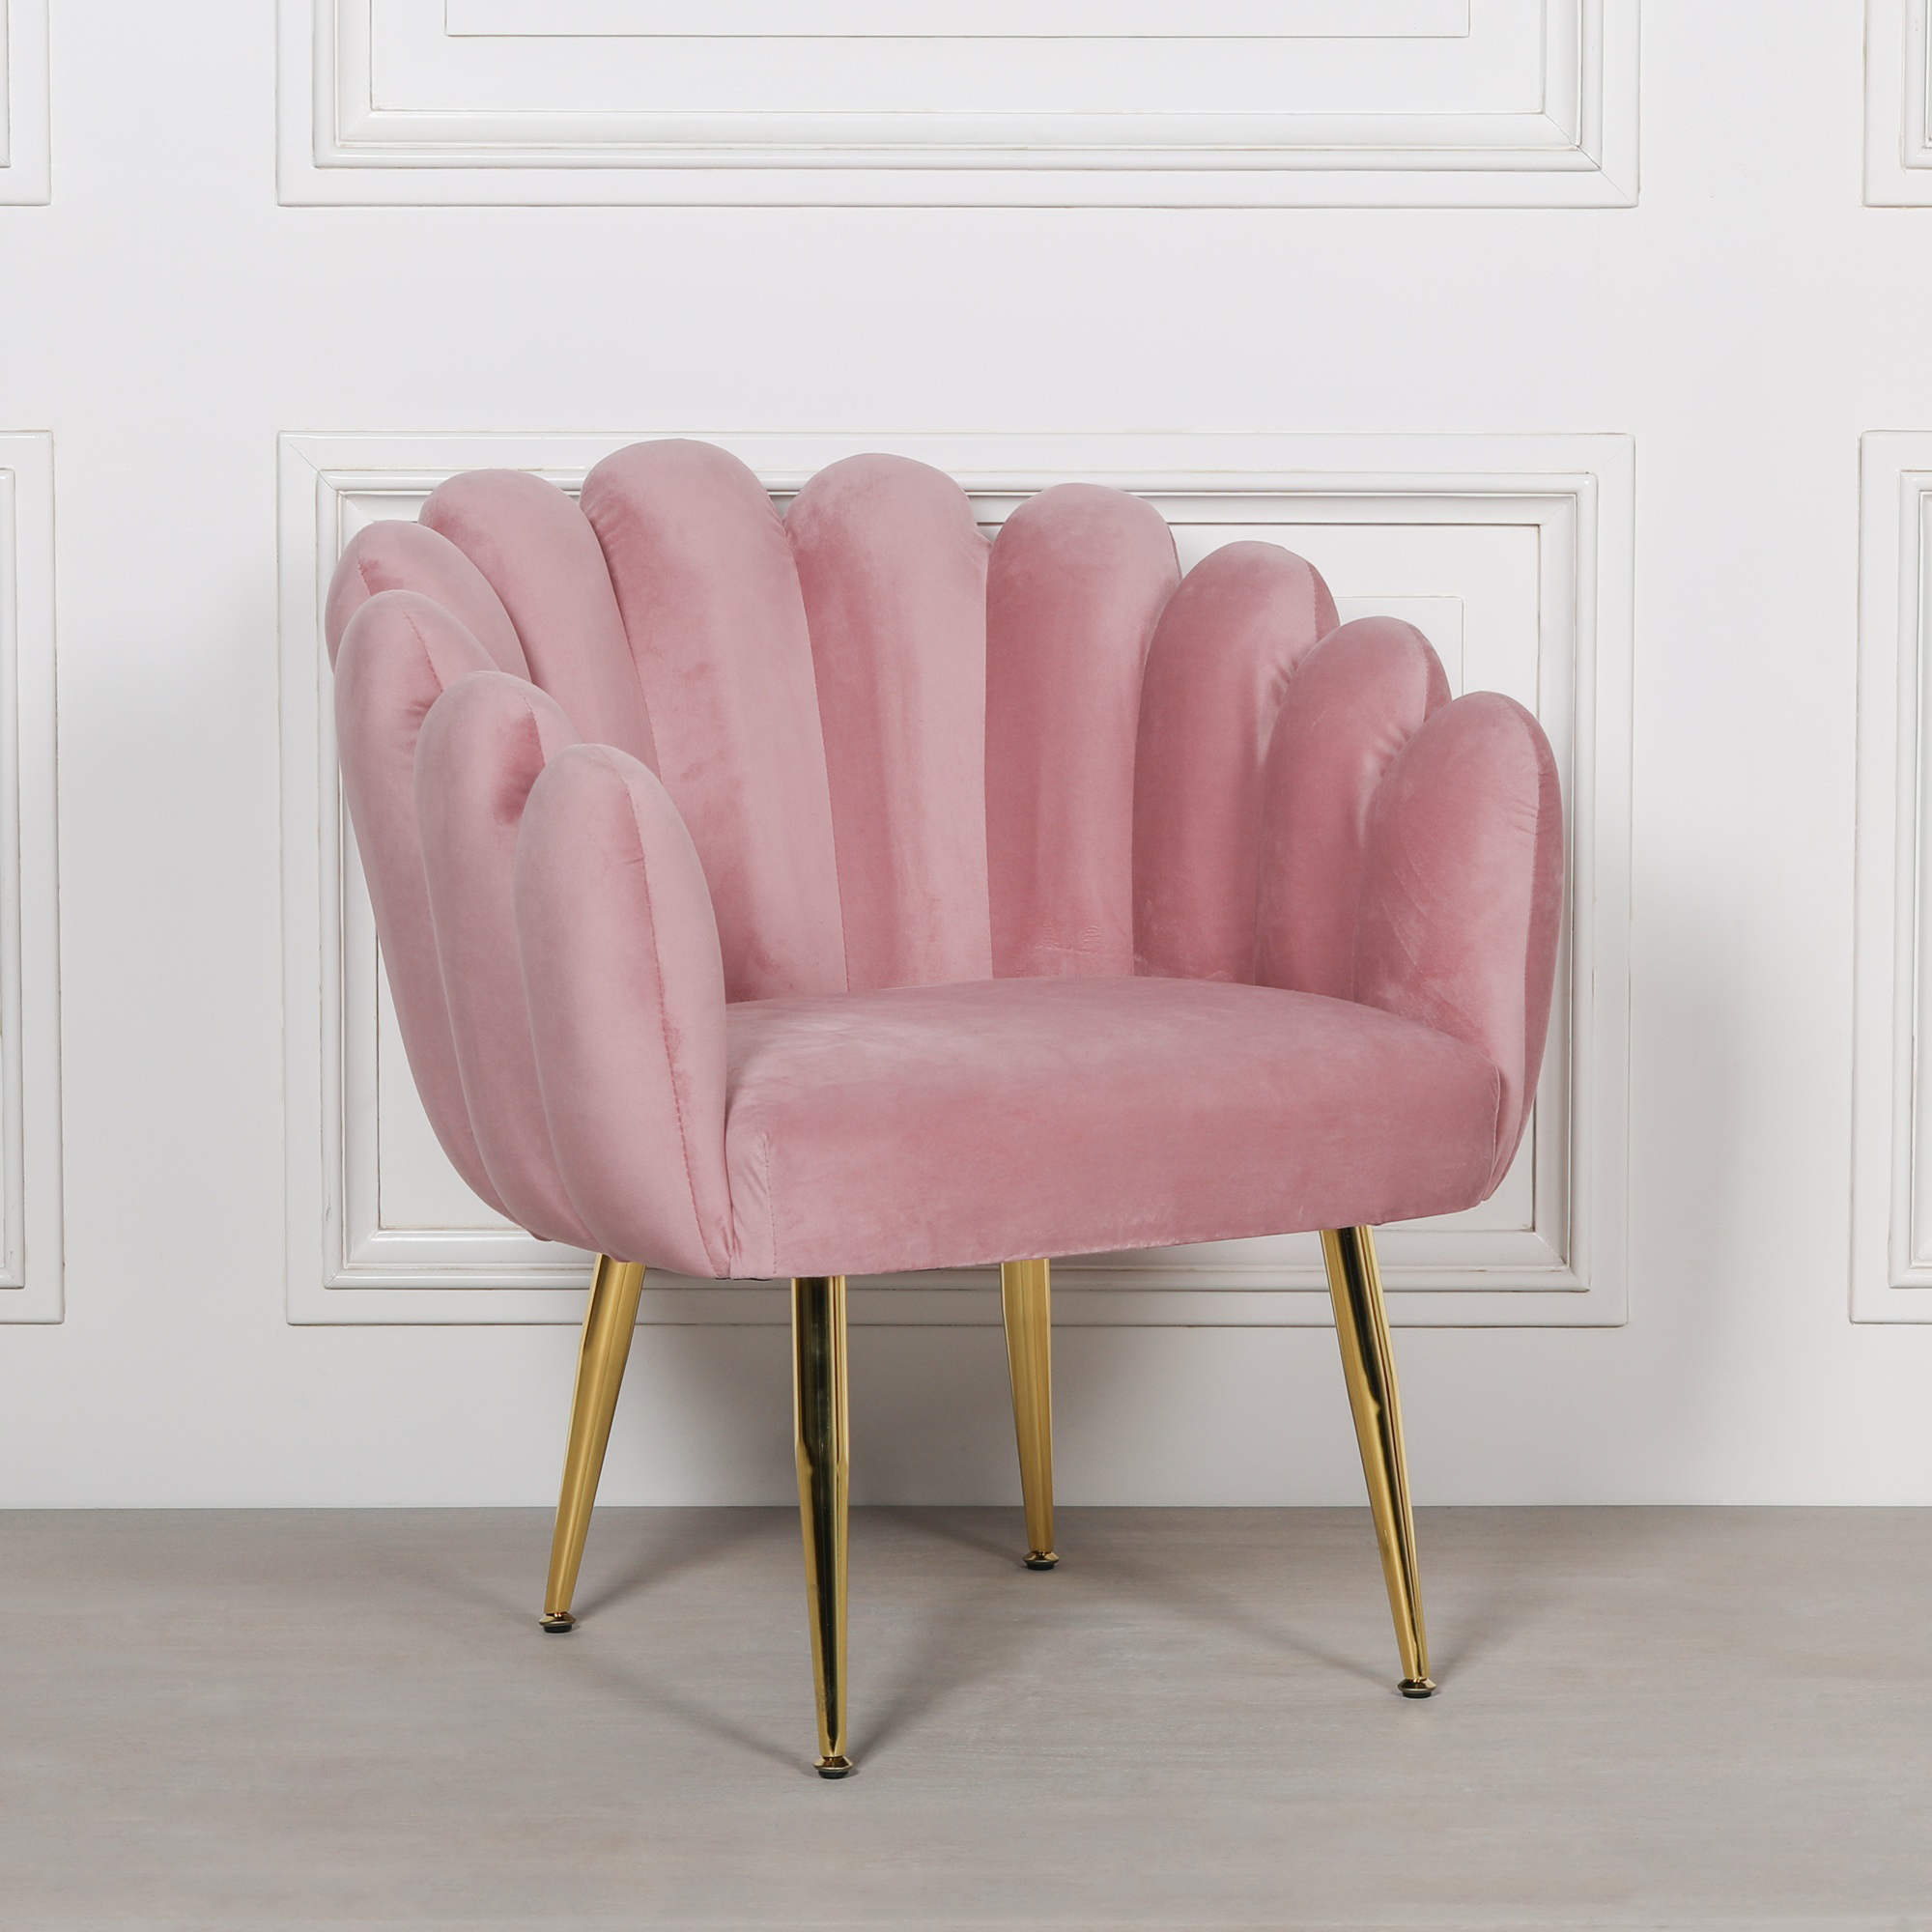 Deco Pink Dining / Bedroom Chair - Maison Reproductions